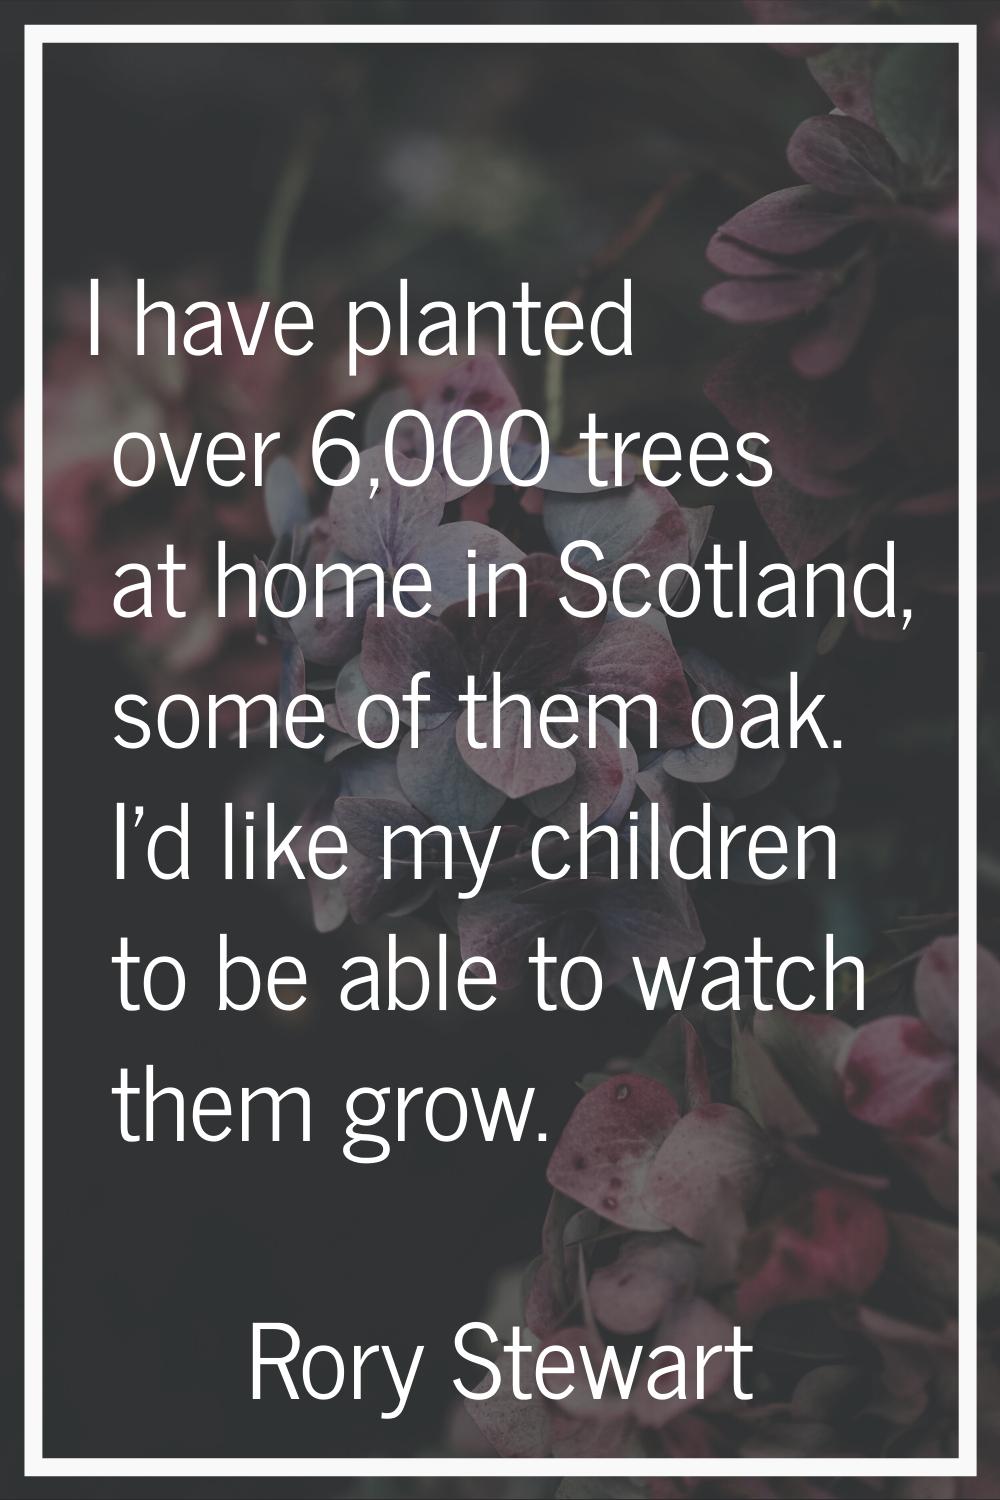 I have planted over 6,000 trees at home in Scotland, some of them oak. I'd like my children to be a